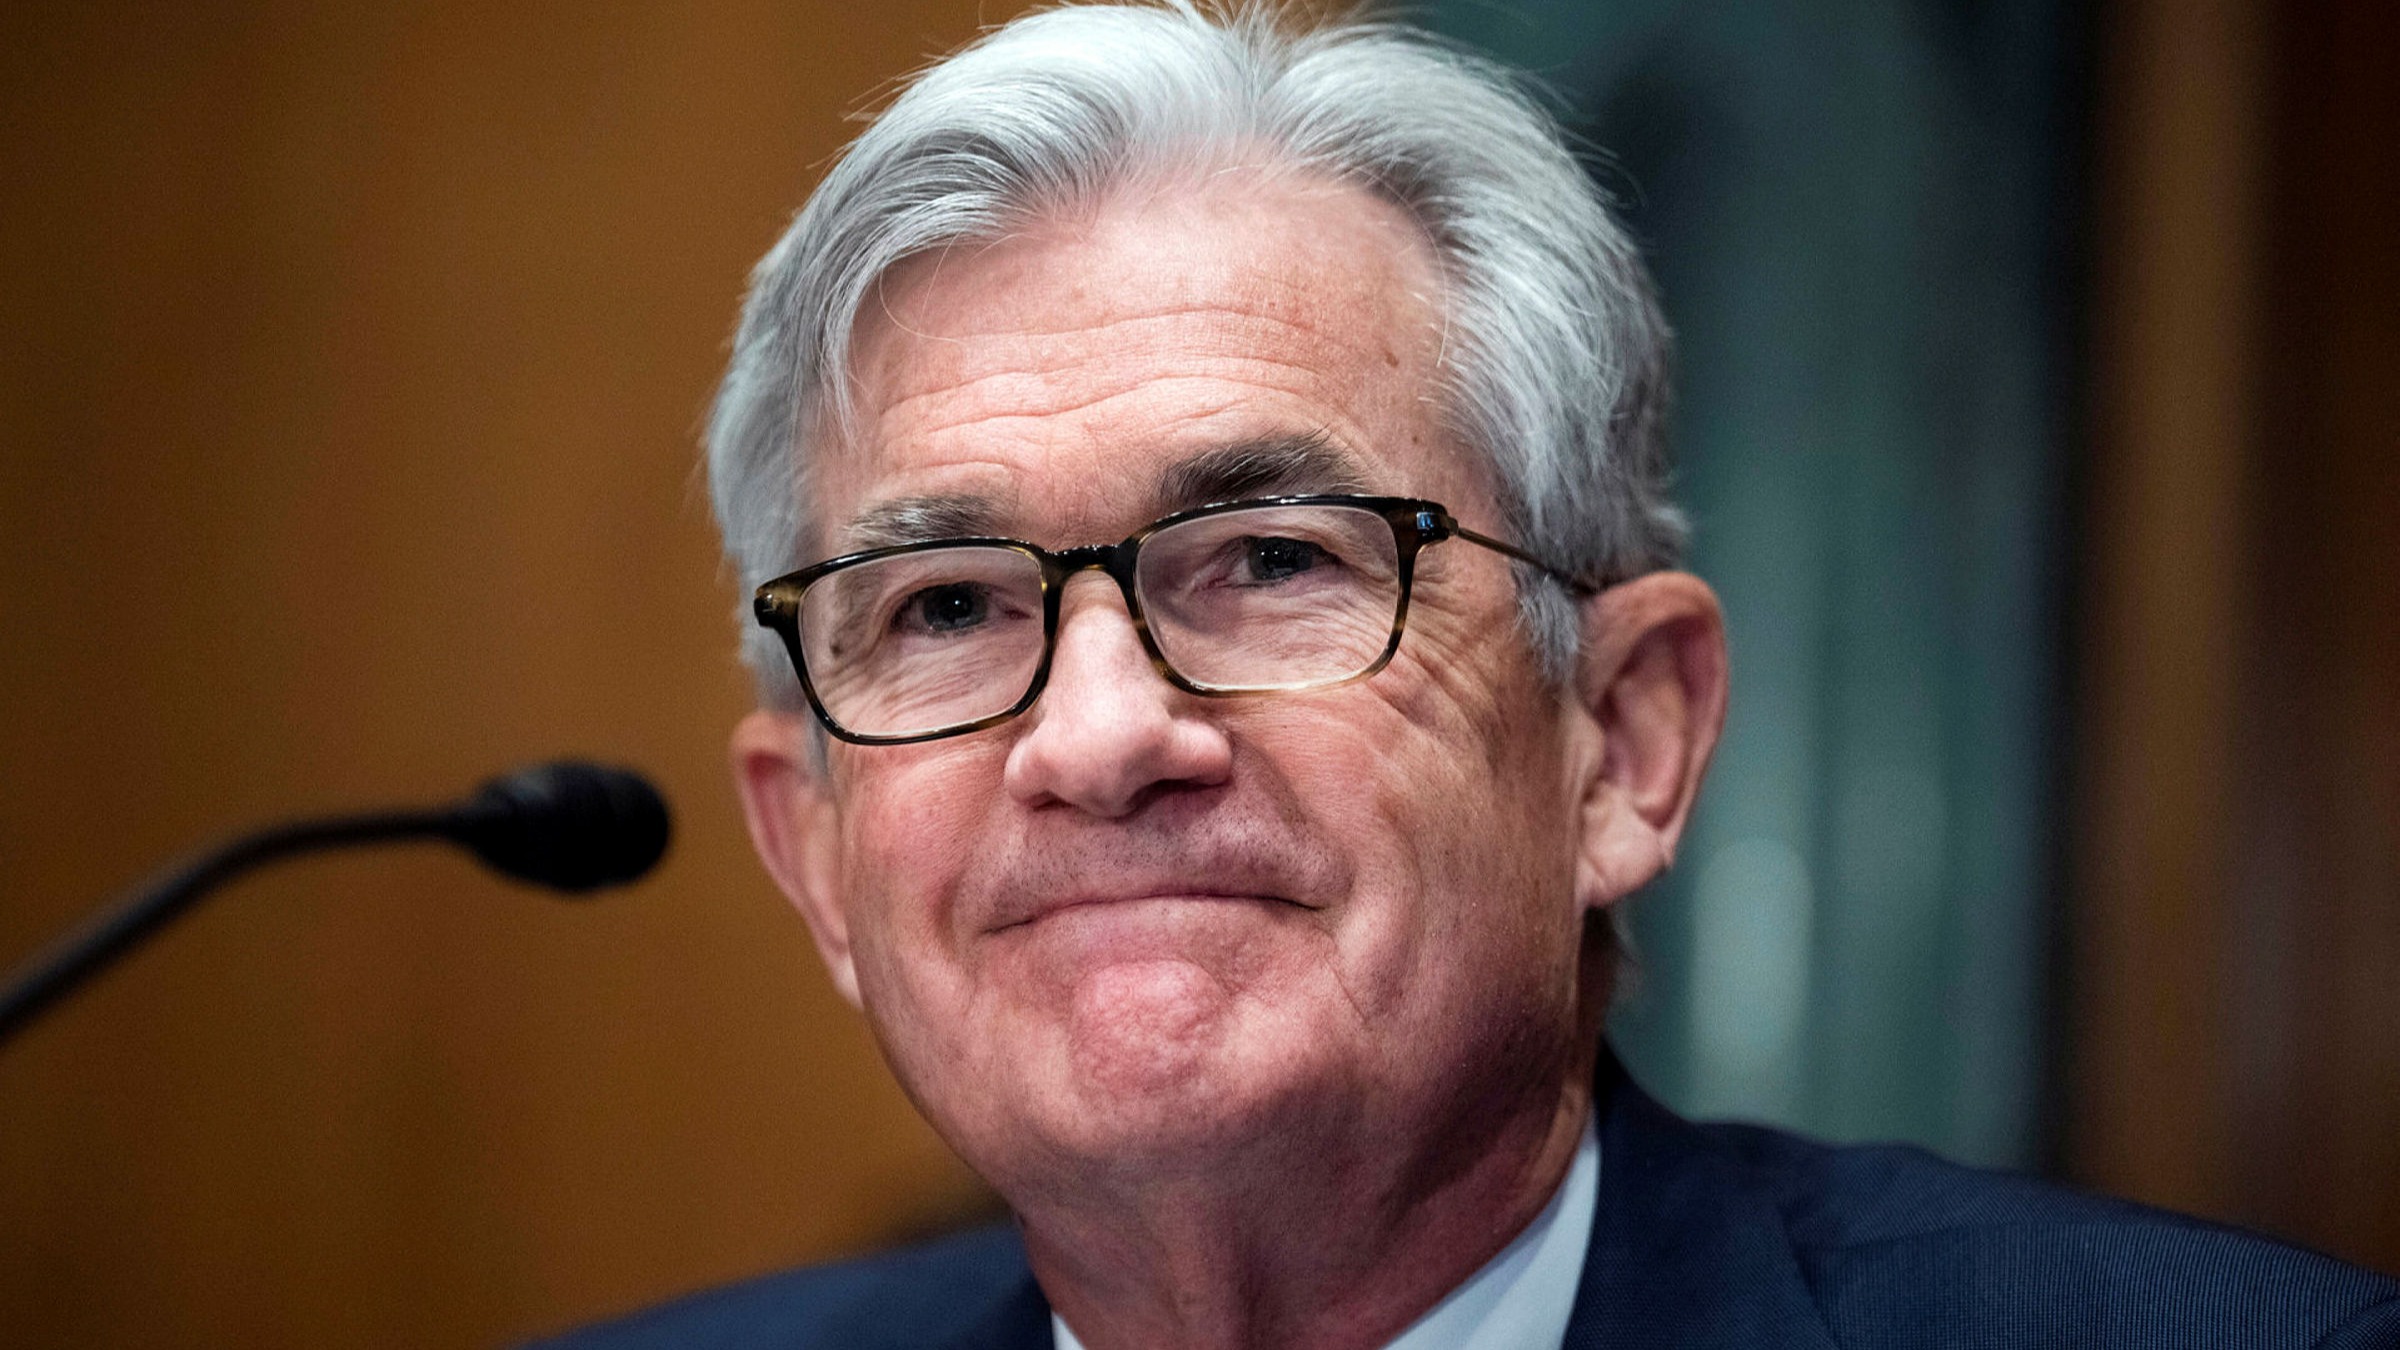 jay powell says fed prepared to move more aggressively to tighten policy | financial times